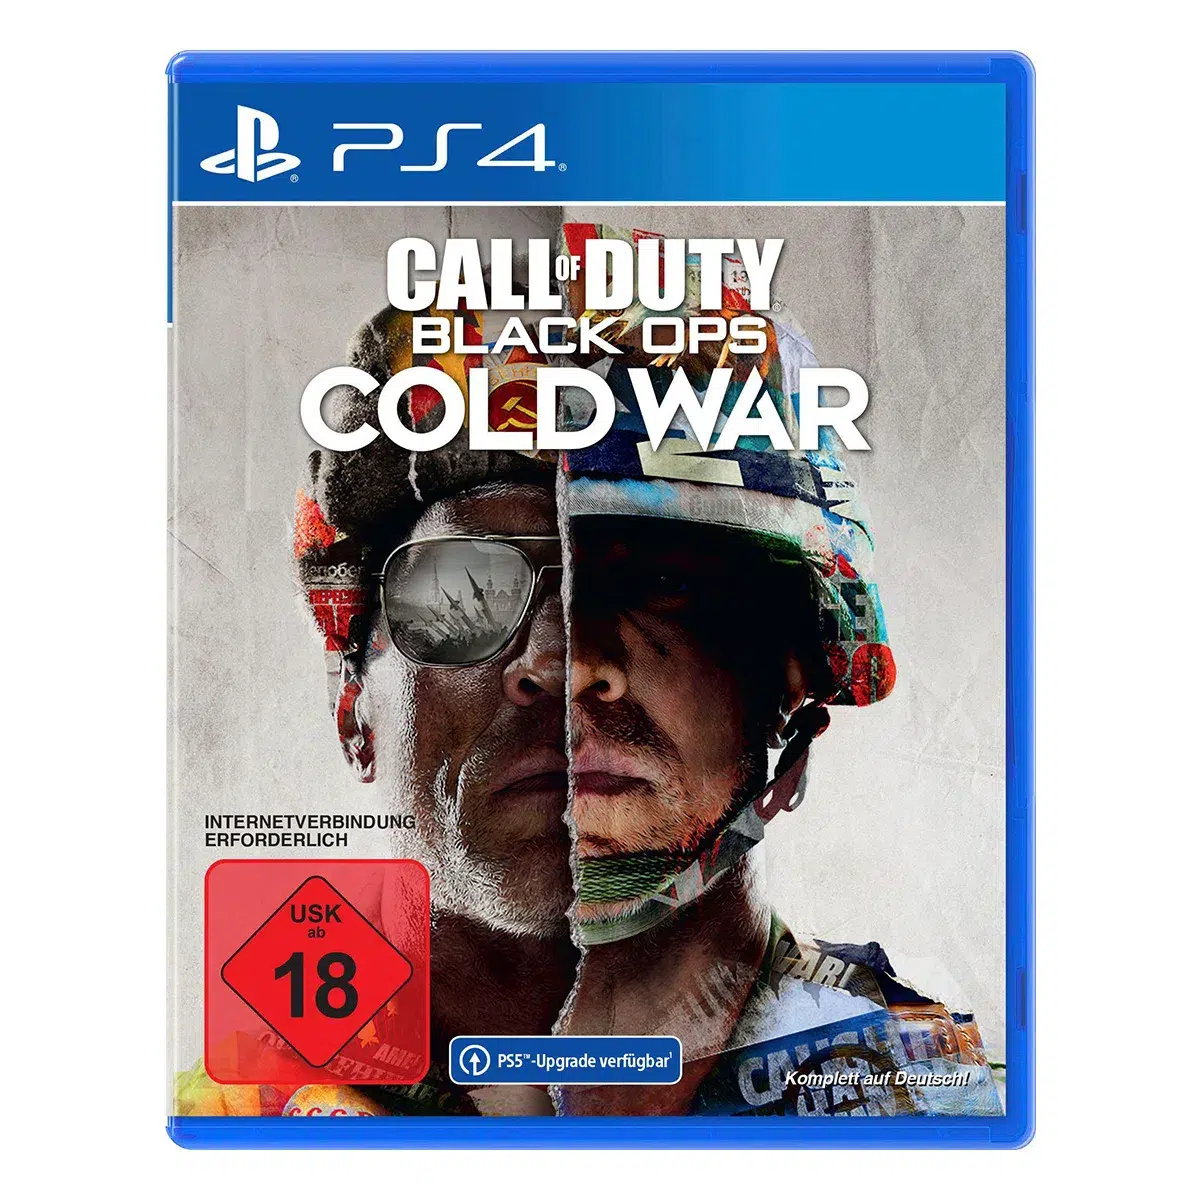 Call of Duty: Black Ops - Cold War - PS4